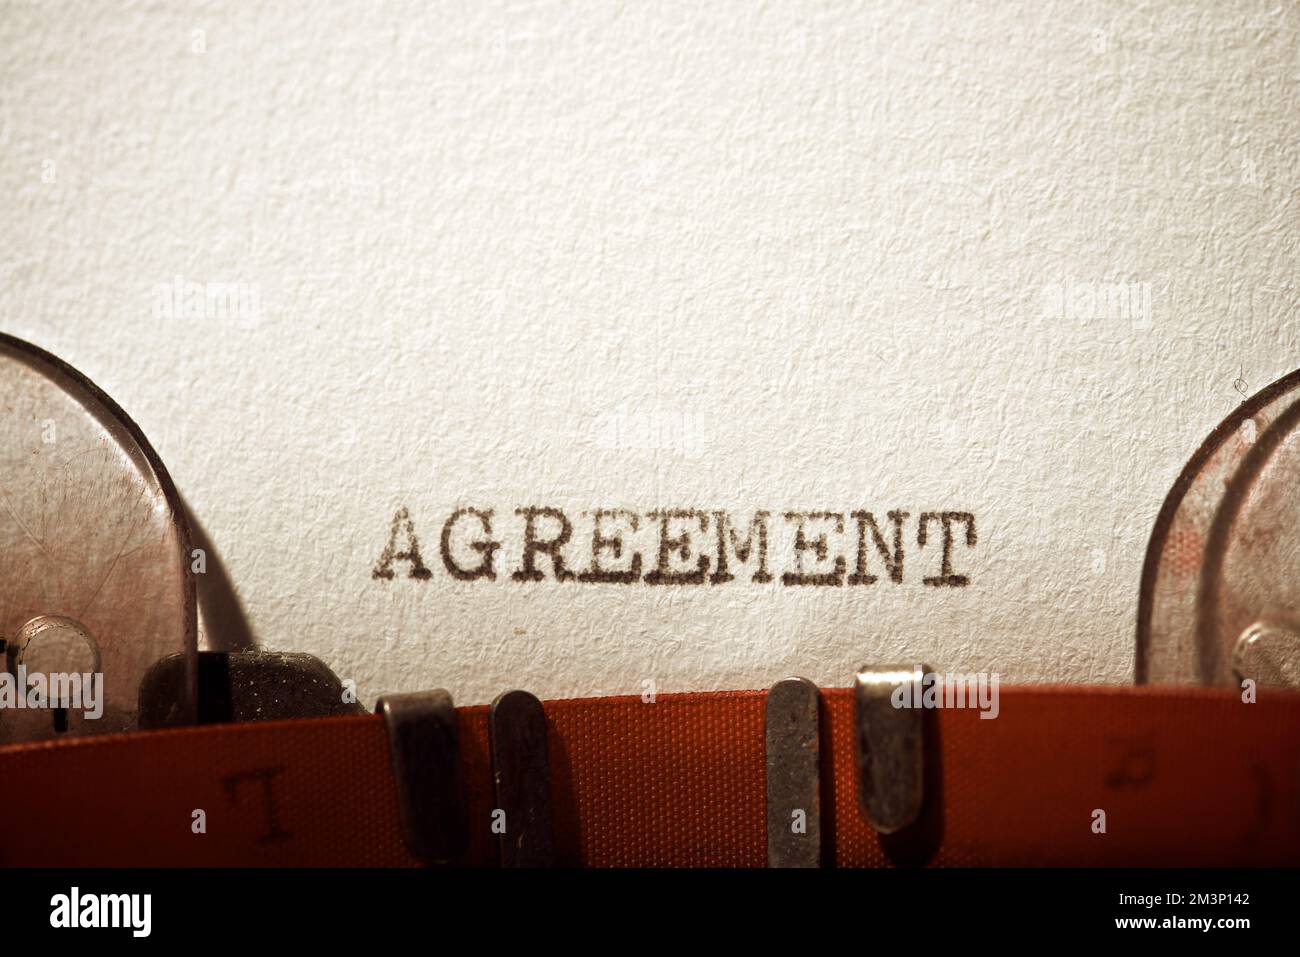 Agreement word written with a typewriter. Stock Photo